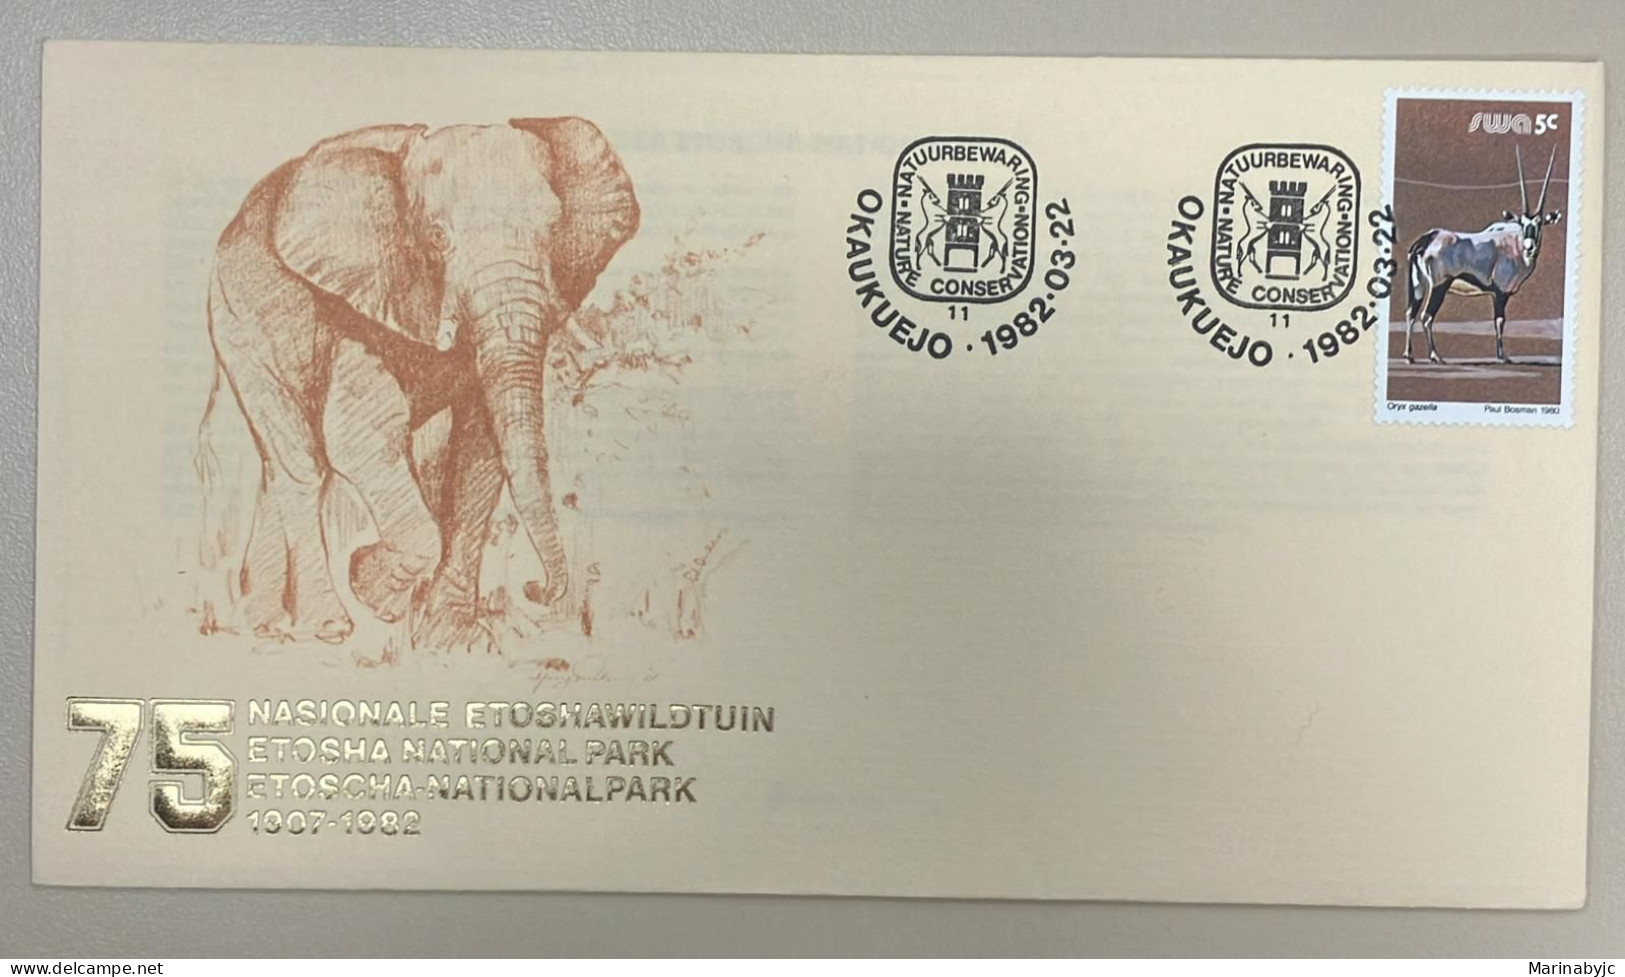 PN) 1982 SOUTH AFRICA, 75TH ANNIVERSARY ETOSHA NATIONAL PARK, FDC XF - Africa (Other)